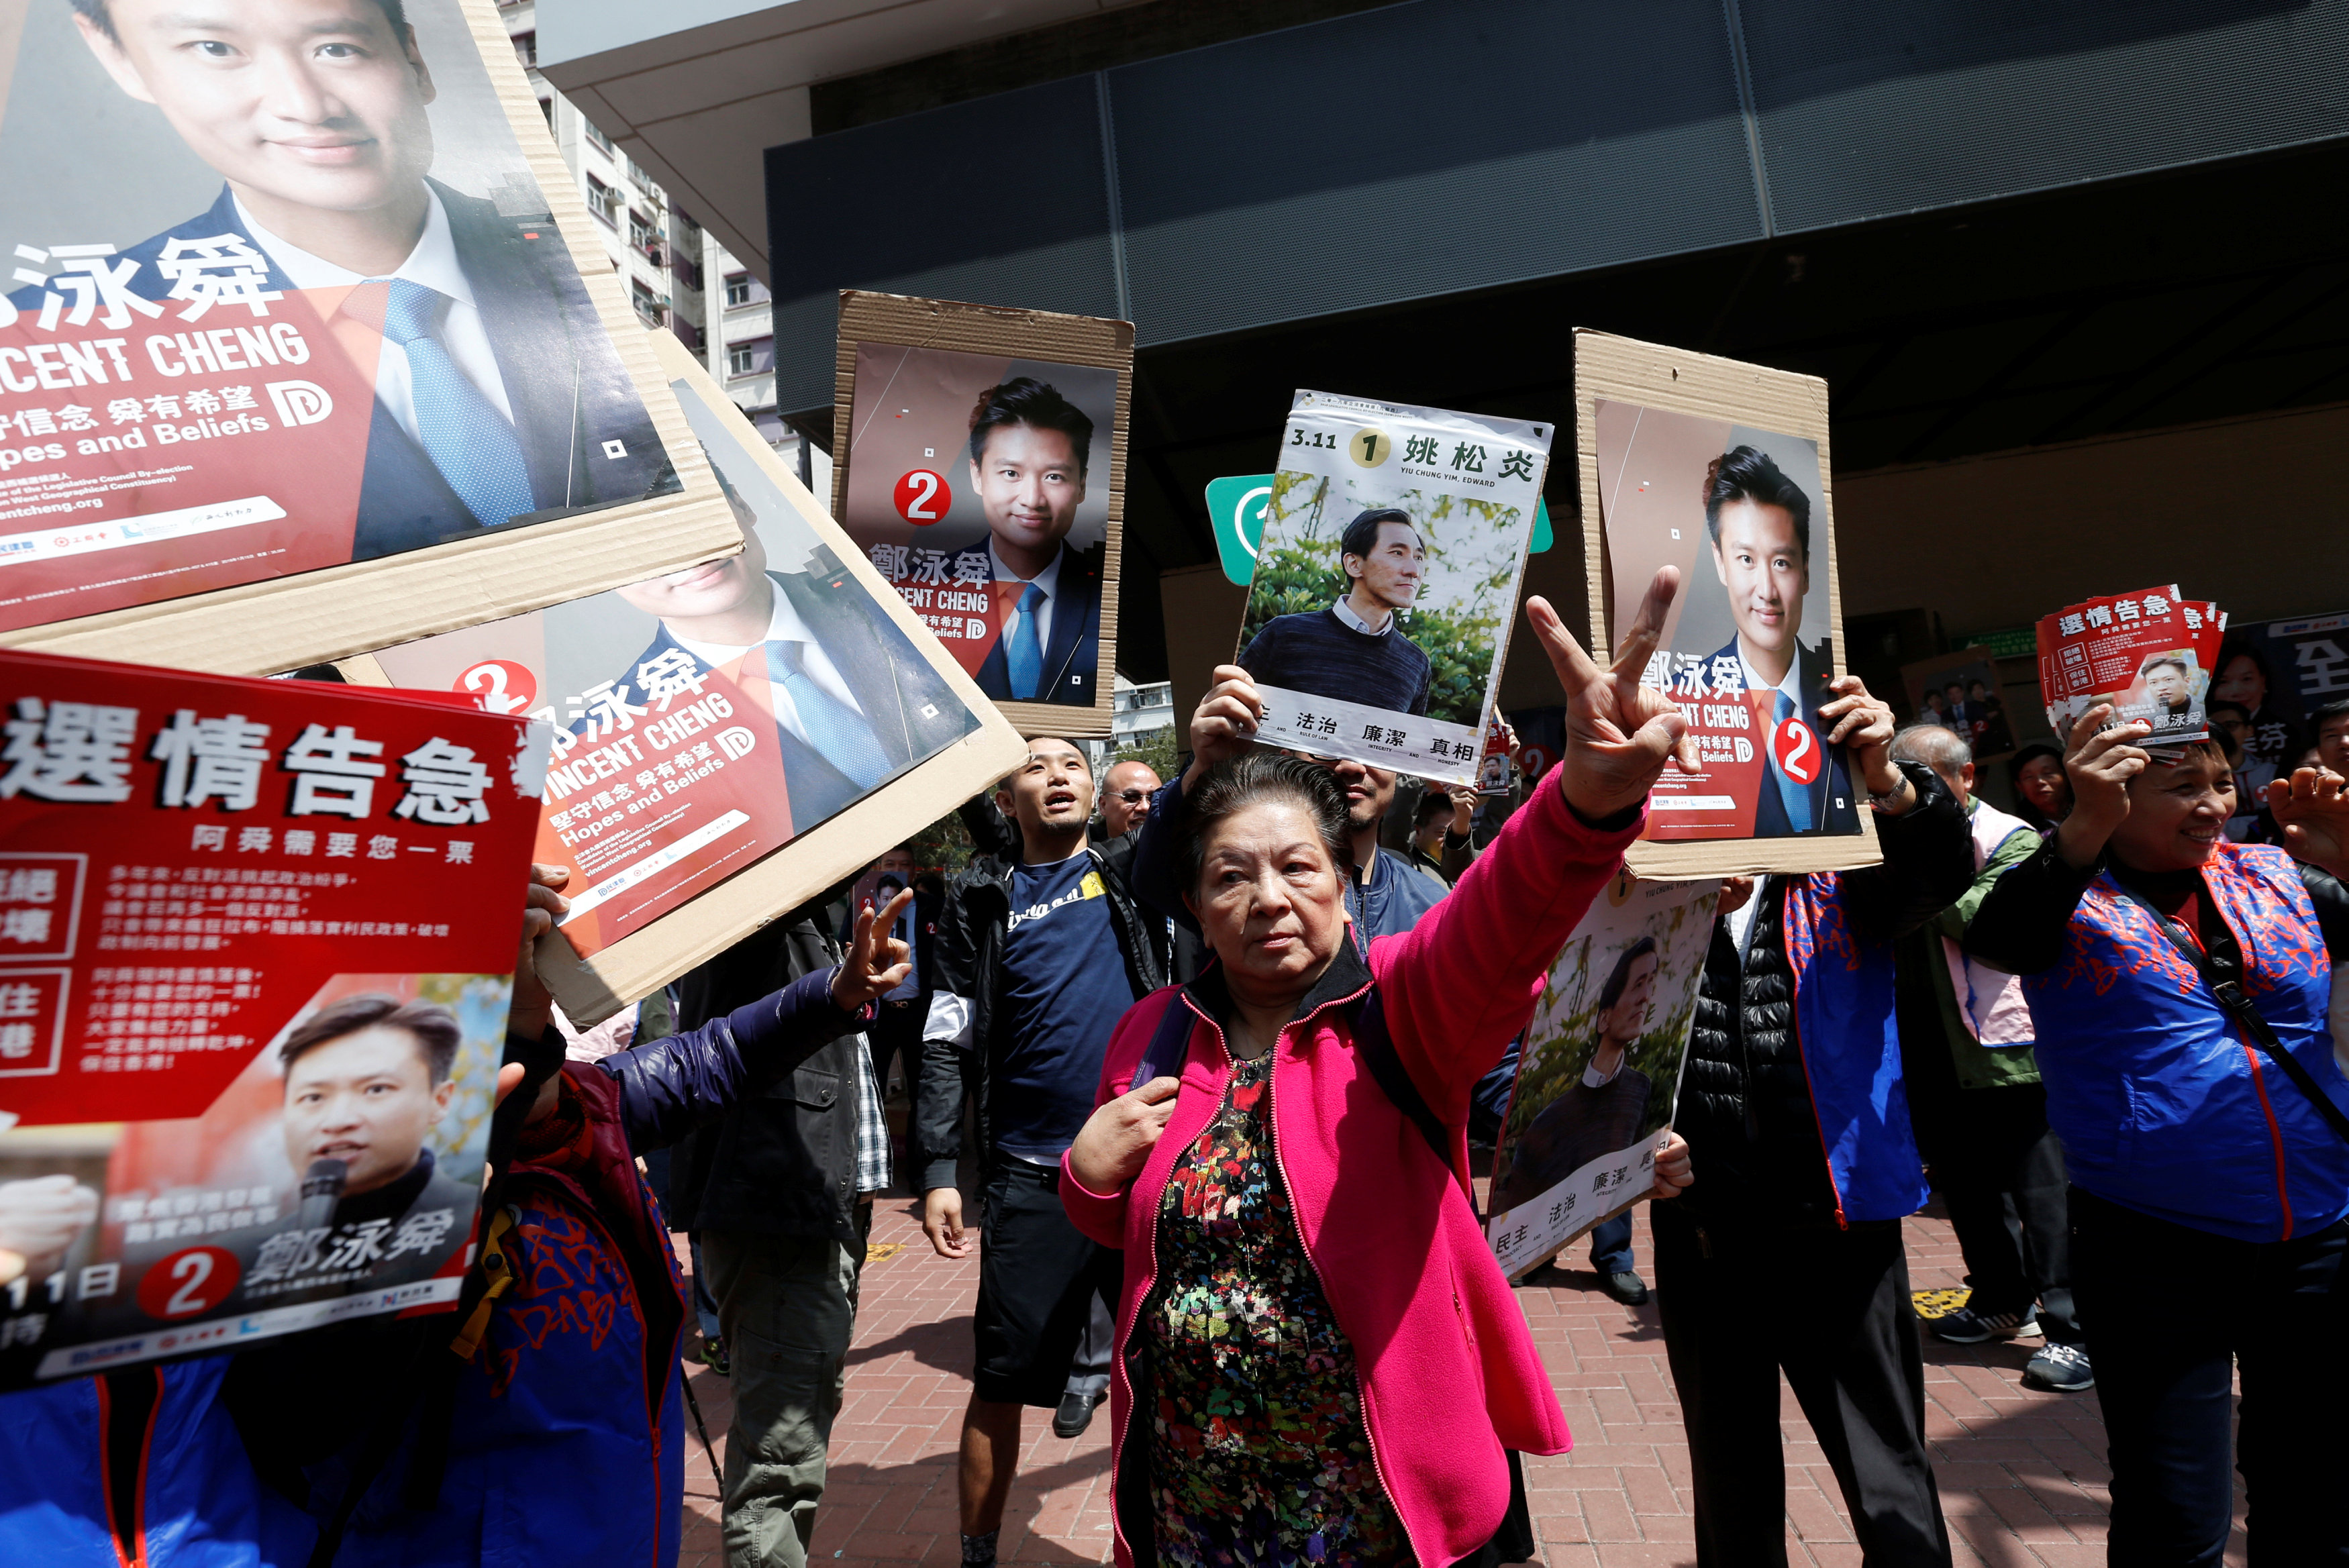 Hong Kong democrats seek to recapture lost ground in key by-elections